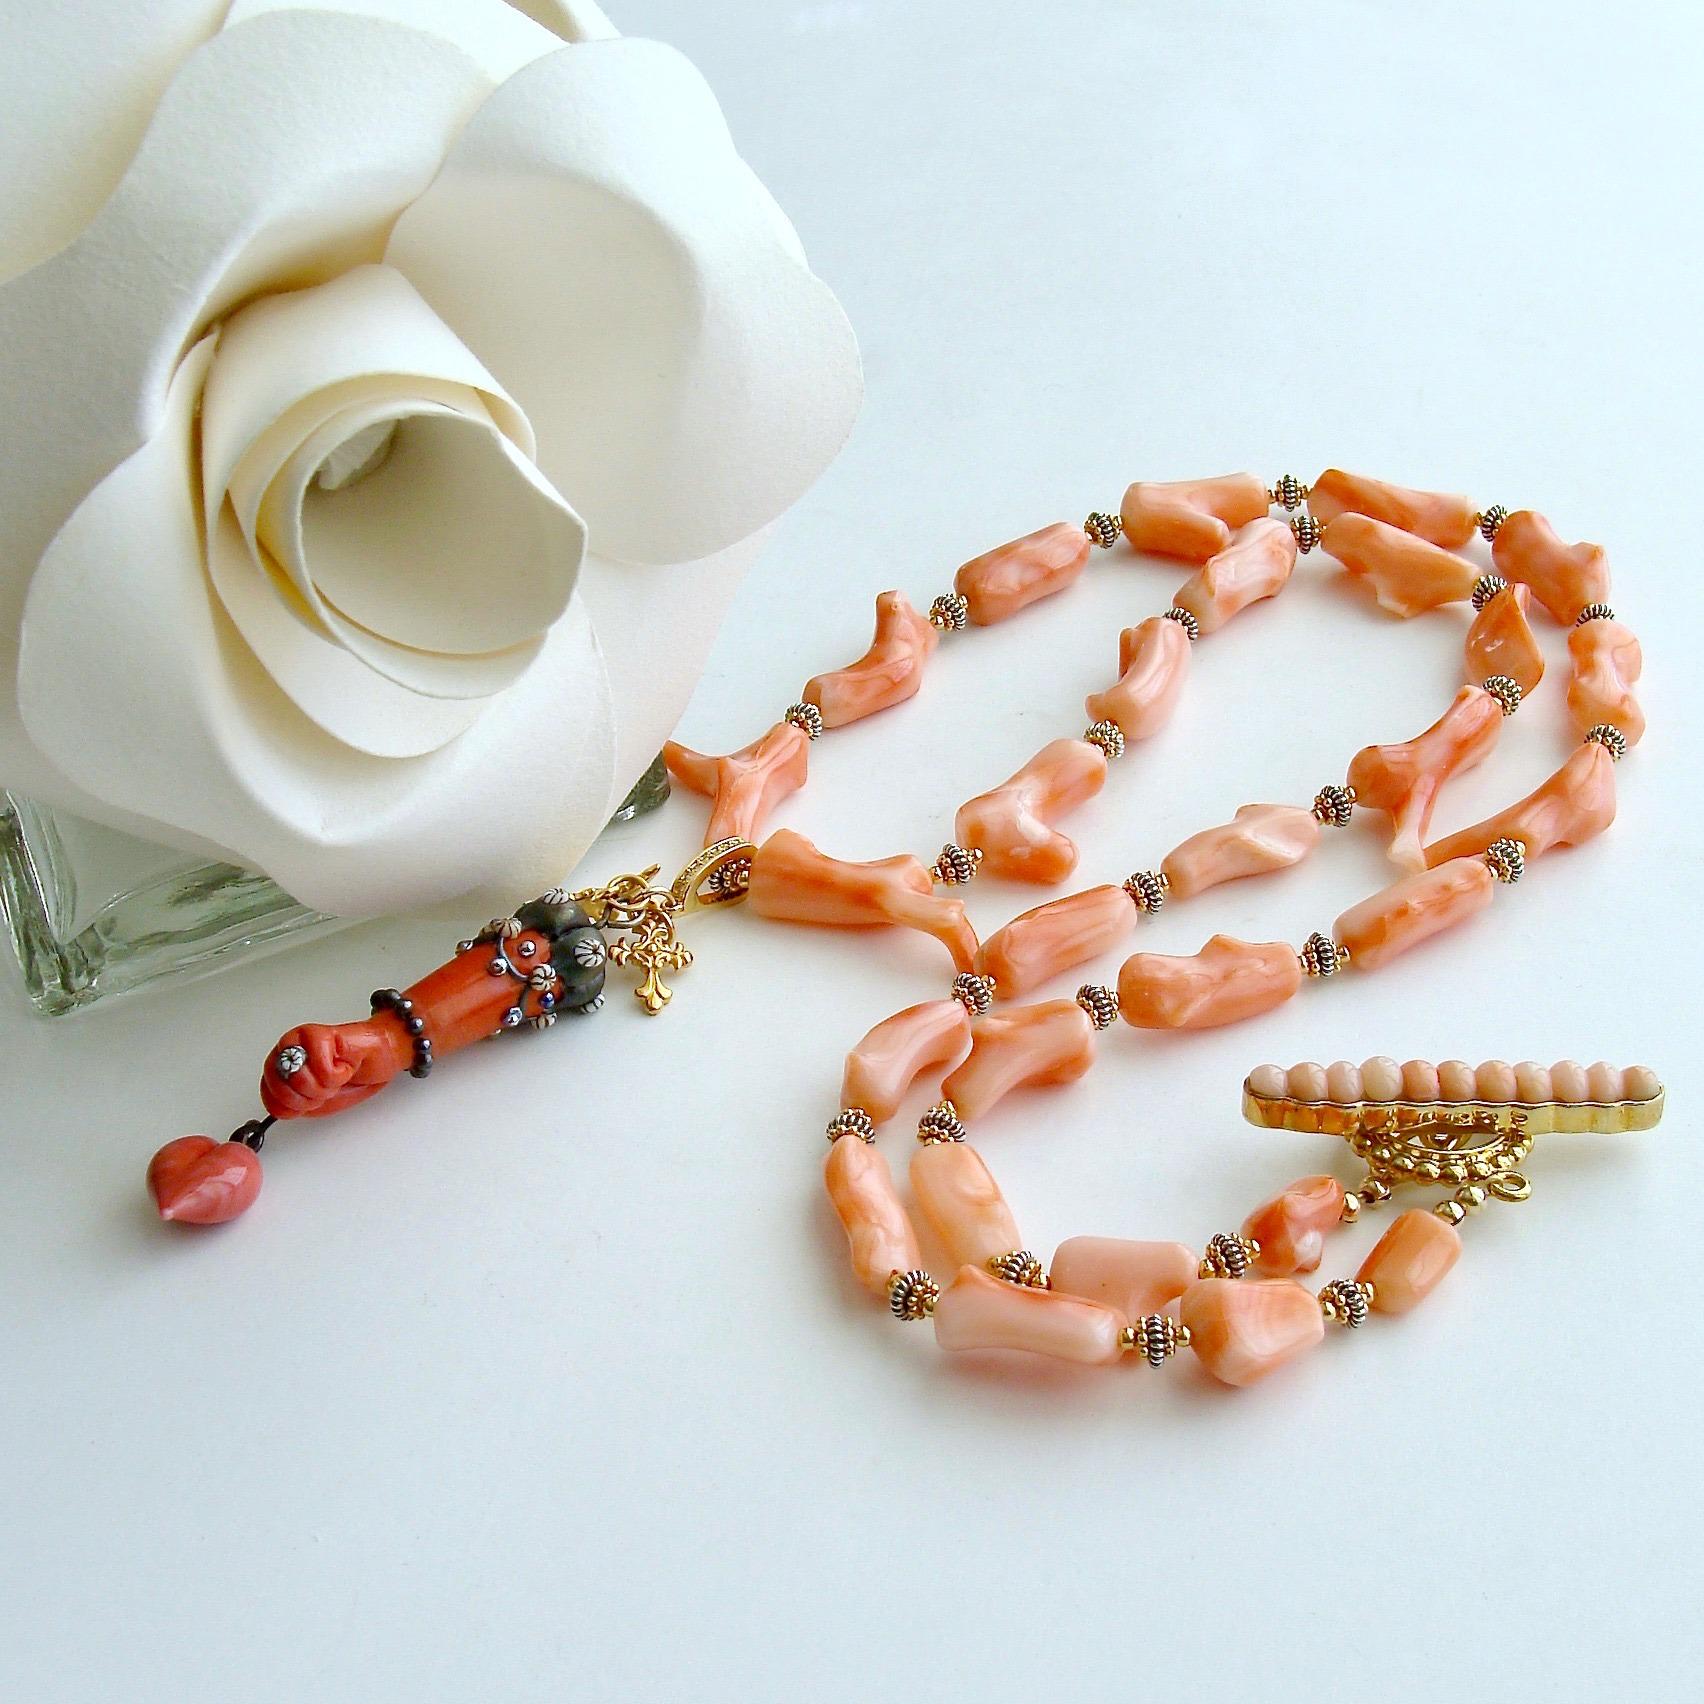 Cordelia Necklace.

A gorgeous suite of  delicate coral branch beads is accented with gold vermeil daisies and oxidized silver mixed metals to add  interest and gently separate each of the coral branches.  A stunning hand and heart lamp work glass